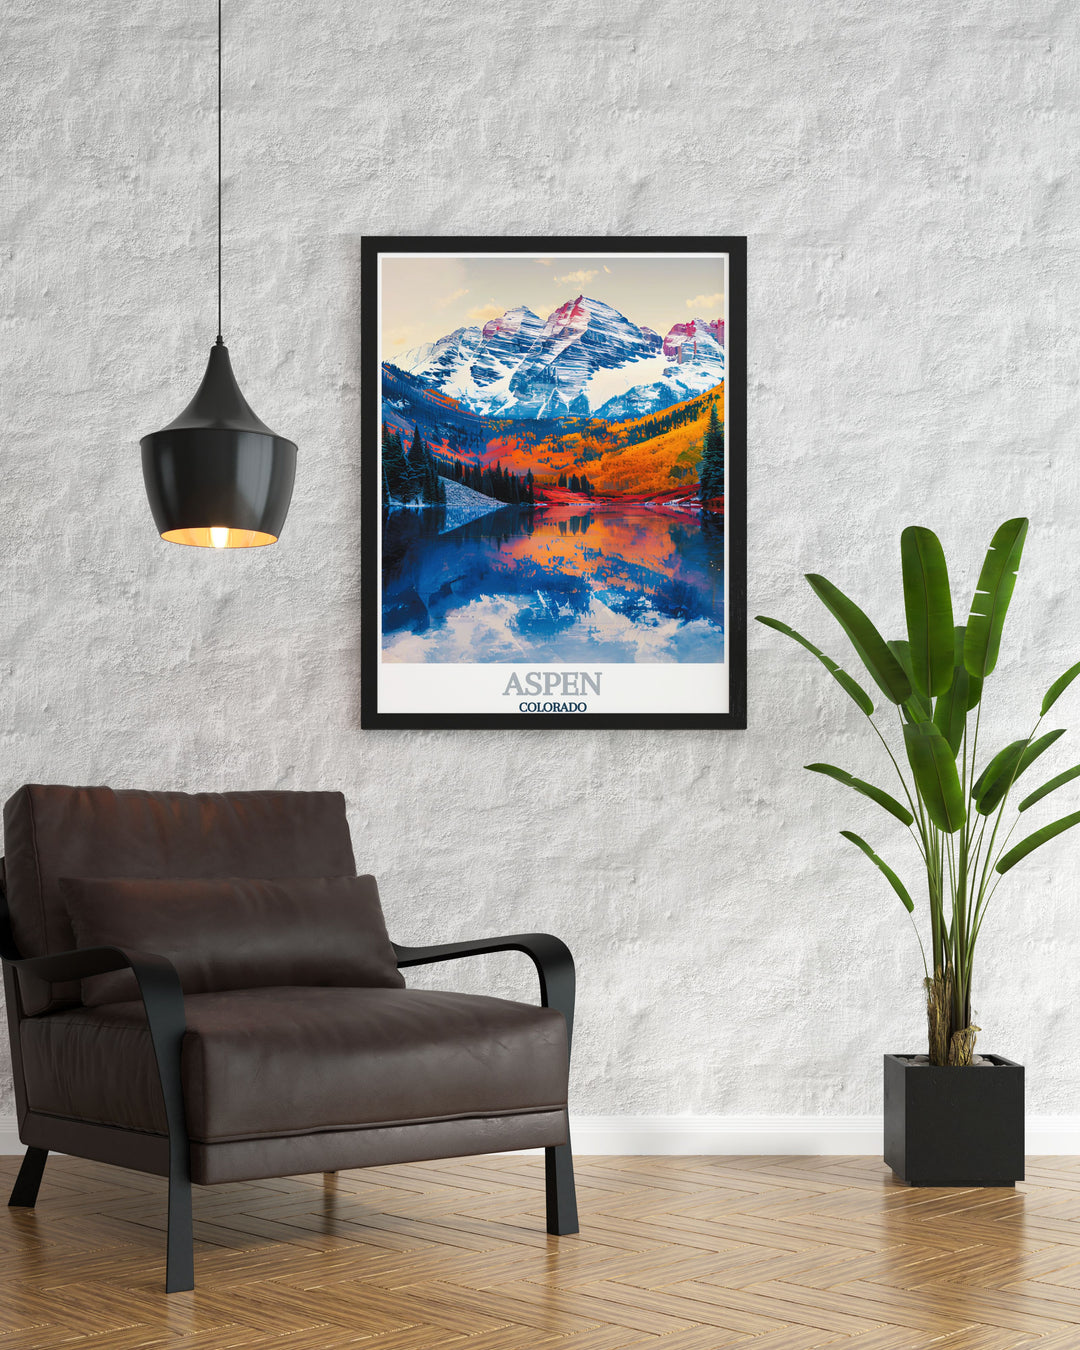 The Maroon Bells and the surrounding Rocky Mountains are beautifully depicted in this illustration, offering a scenic view of Colorados most photographed peaks and lush landscapes.